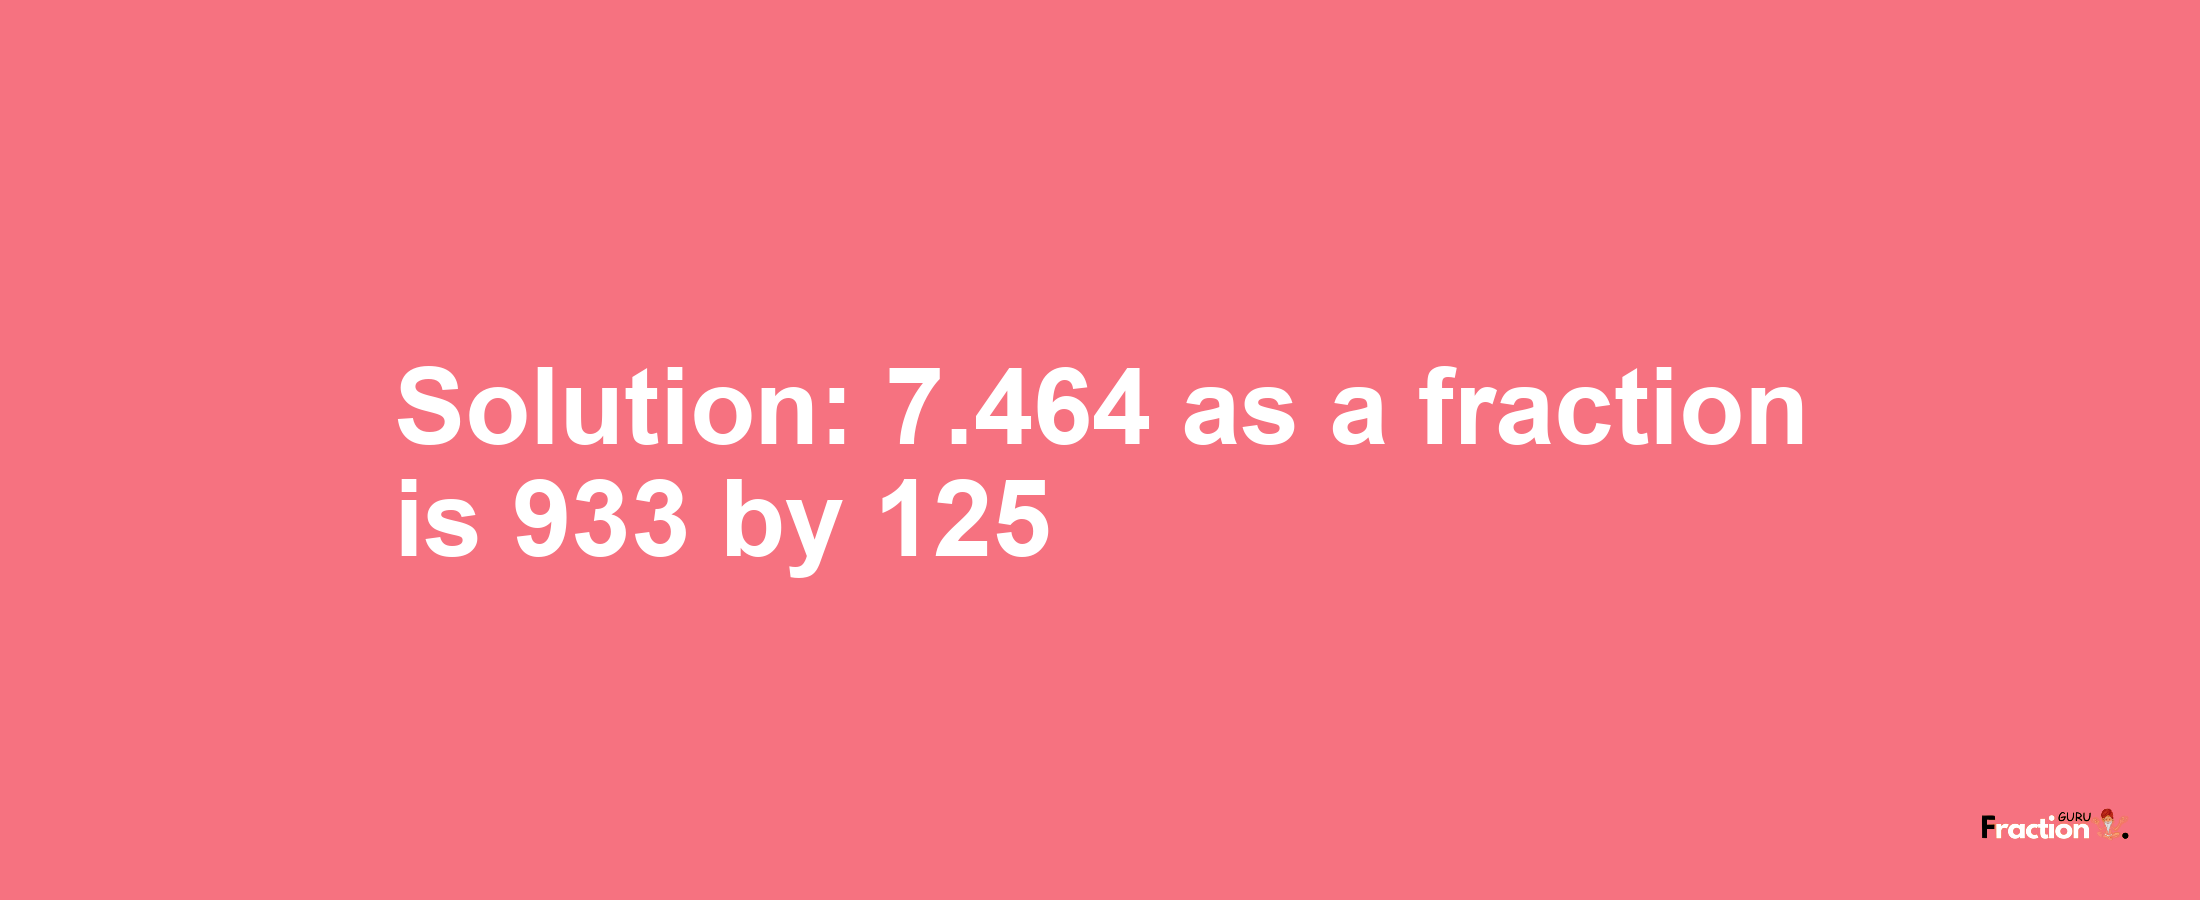 Solution:7.464 as a fraction is 933/125